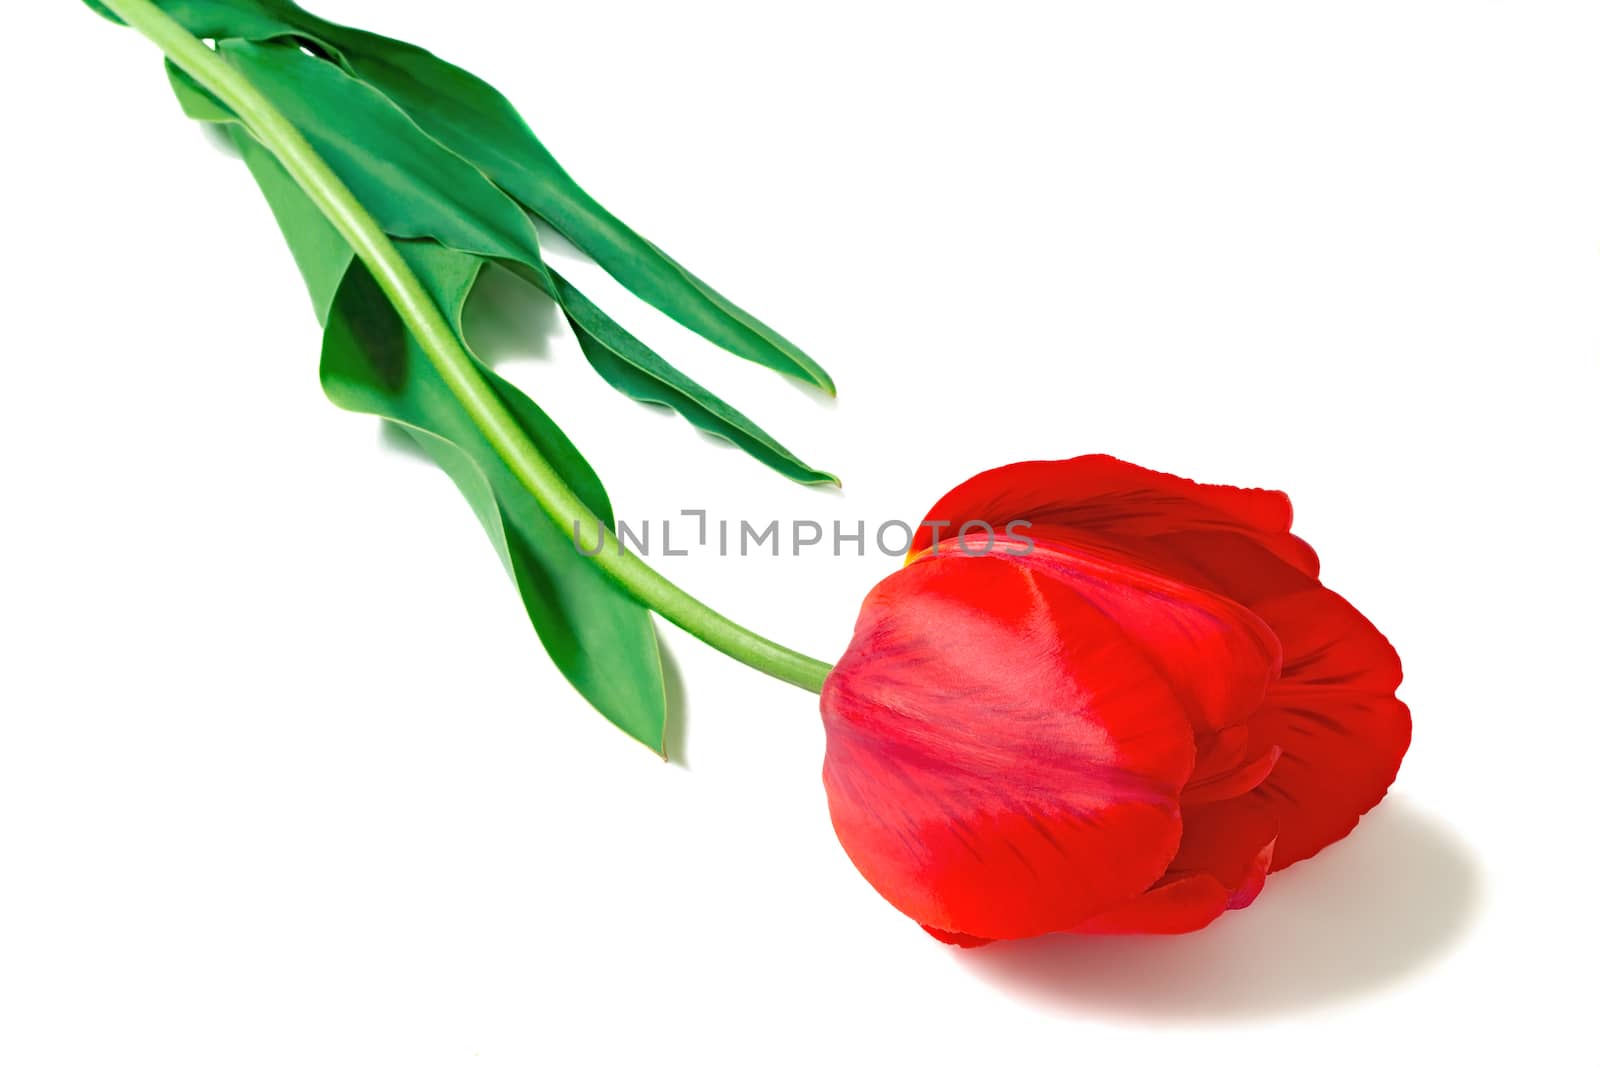 One big beautiful tulip of bright red color with green leaves on a white background.